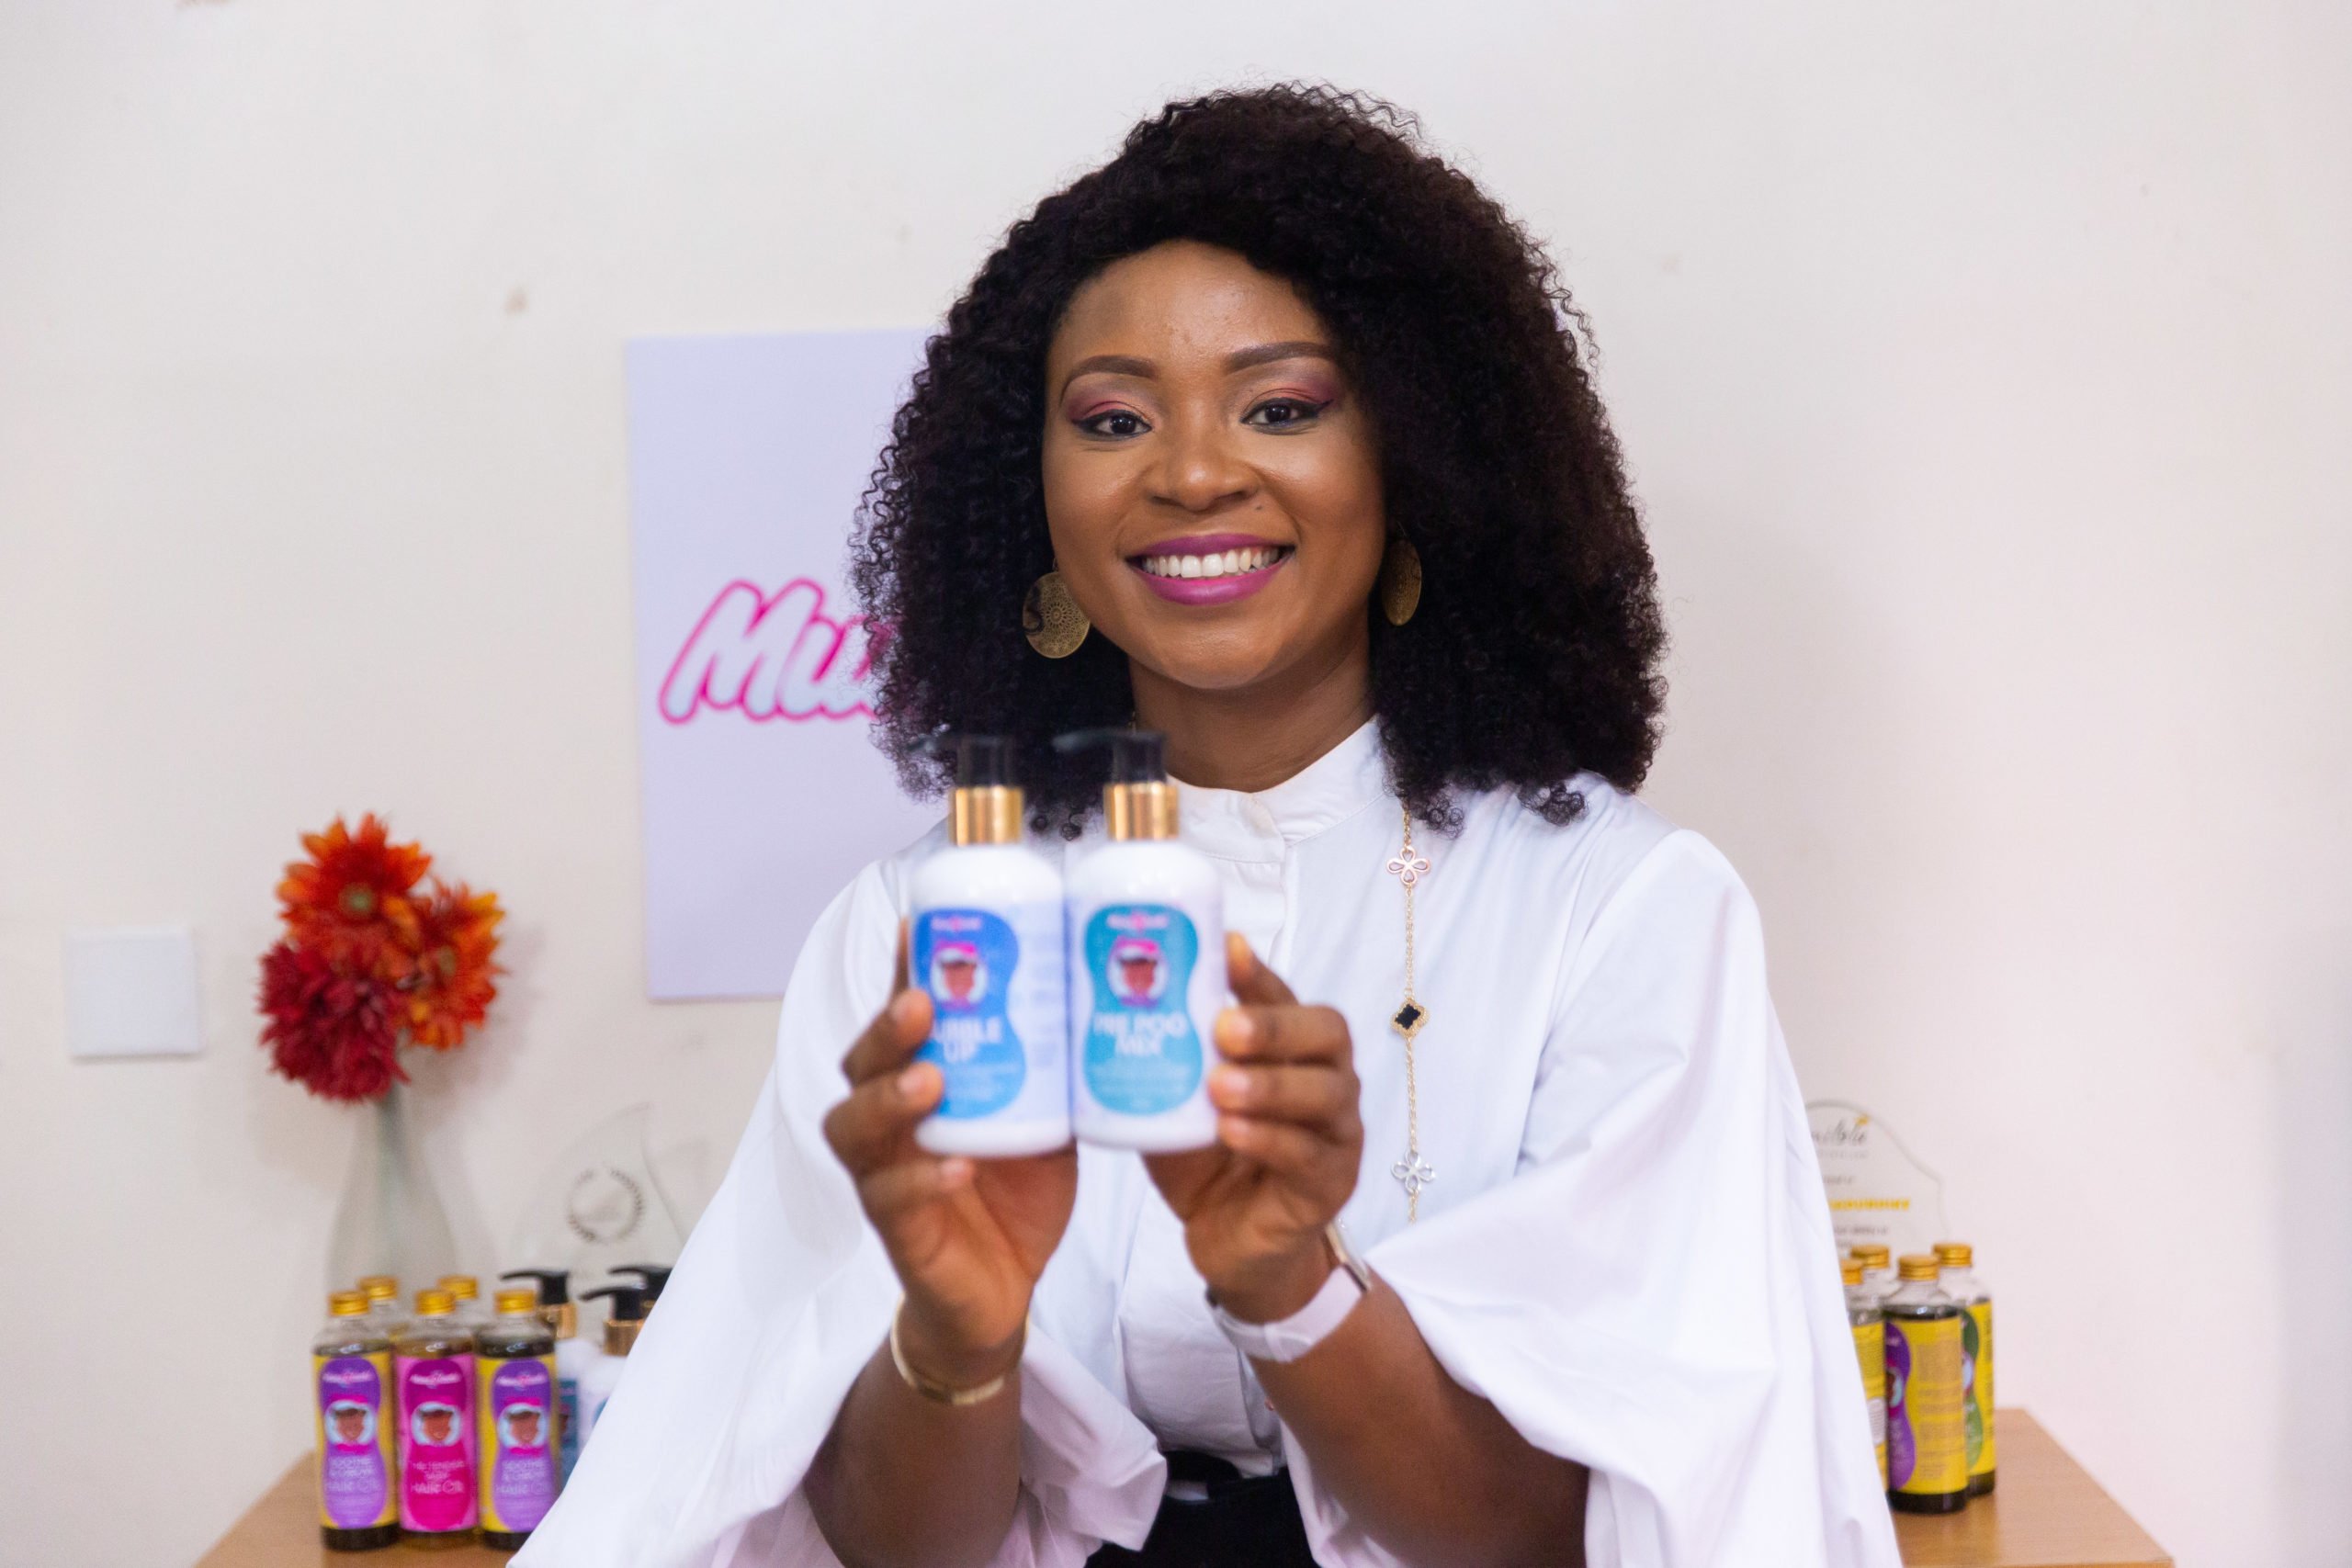 Oluchi Madubuike poses for a portrait with her hair products in Lekki, Lagos Nigeria on 25th February 2021. The Cherie Blair Foundation for Women continues to support women entrepreneurs across many African countries through their blended learning programmes, like Road to Growth and HerVenture.